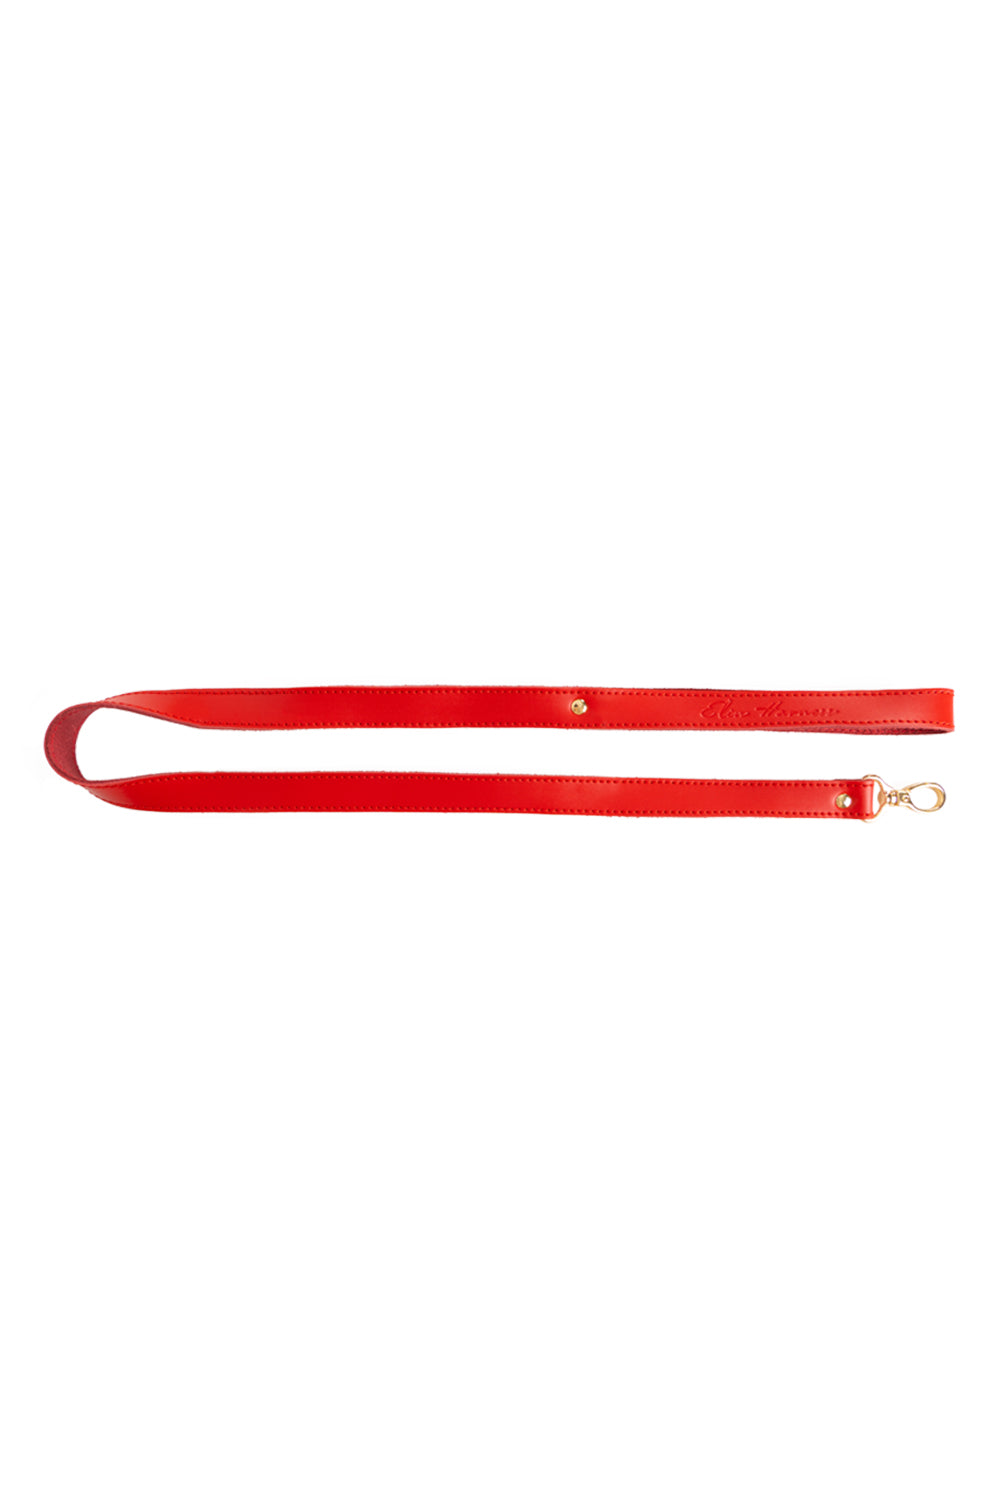 Leather leash. Red